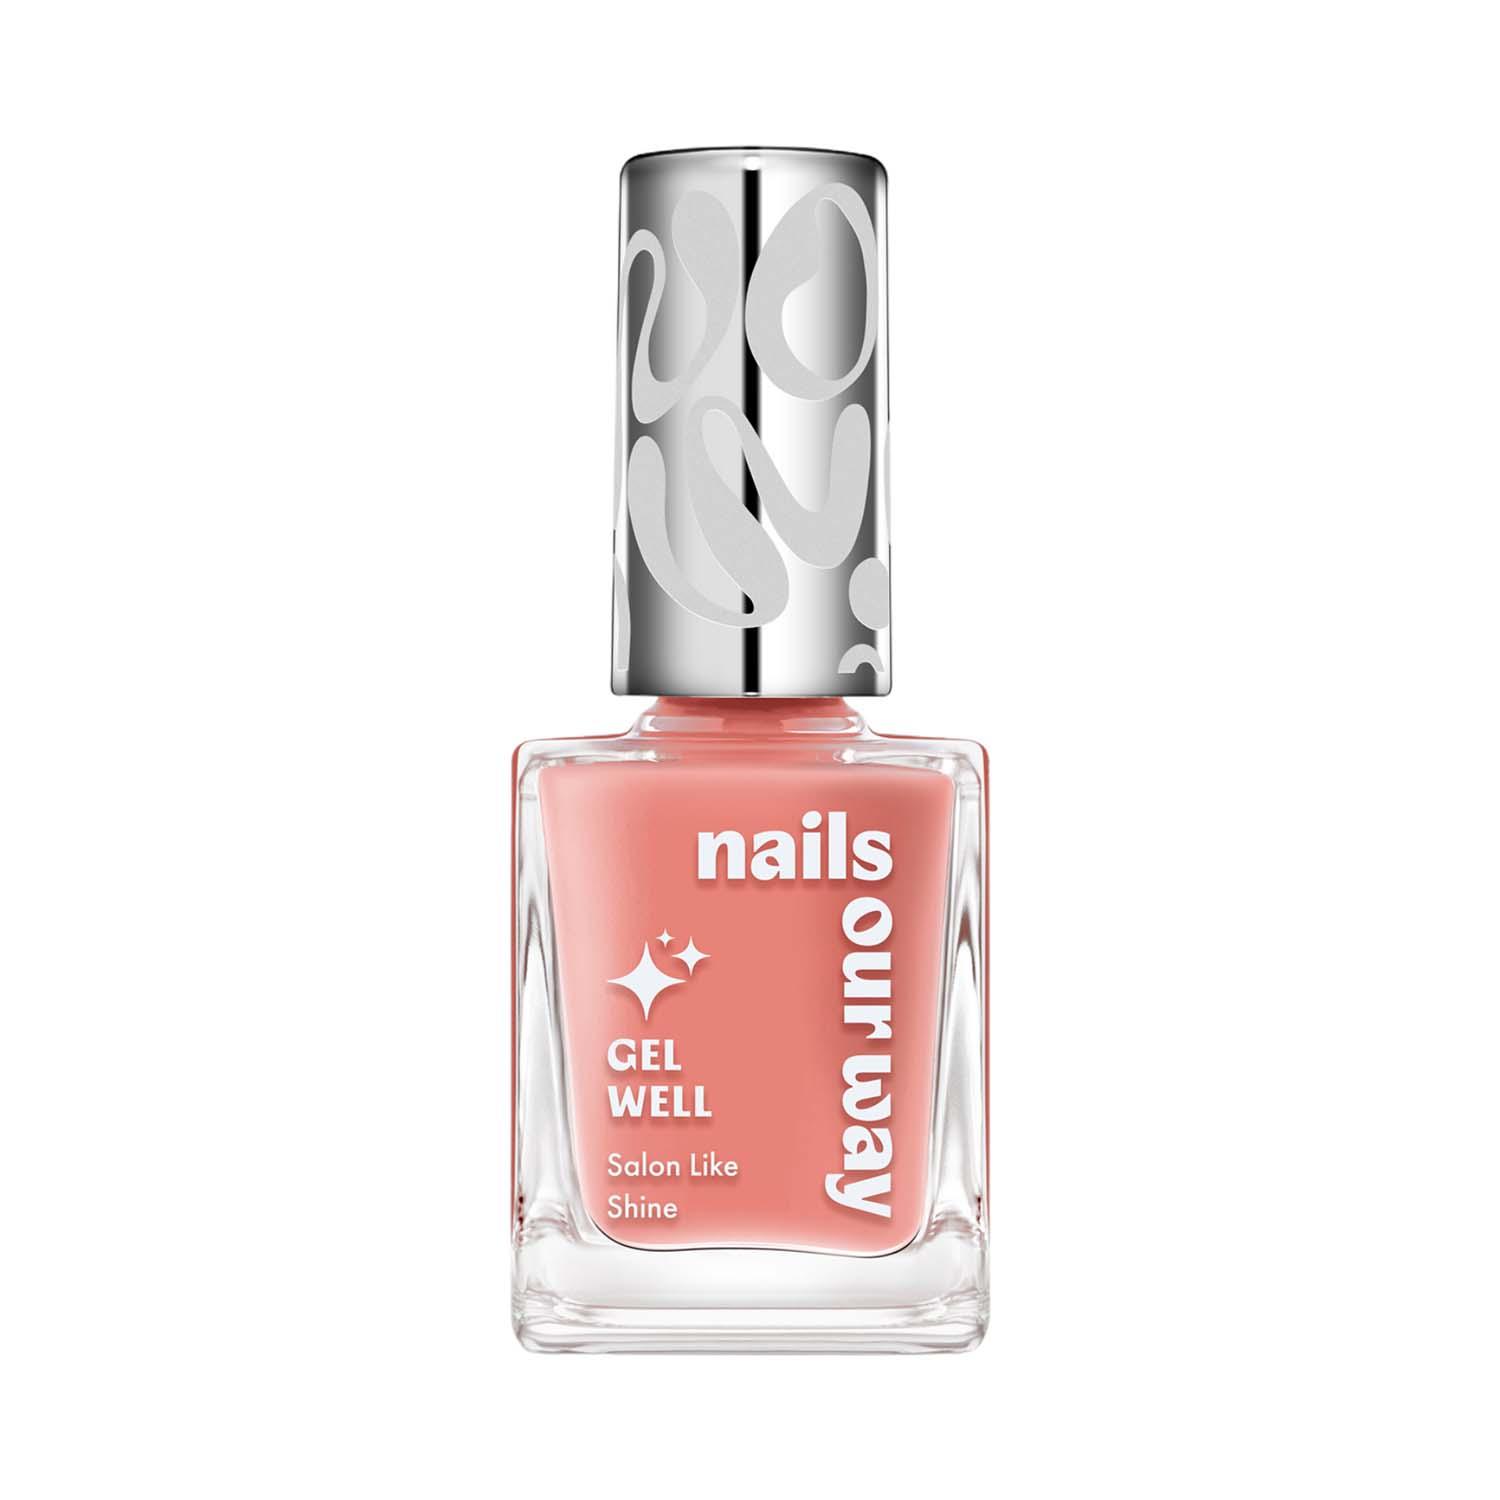 Nails Our Way | Nails Our Way Gel Well Nail Enamel - 502 Spontaneous (10 ml)